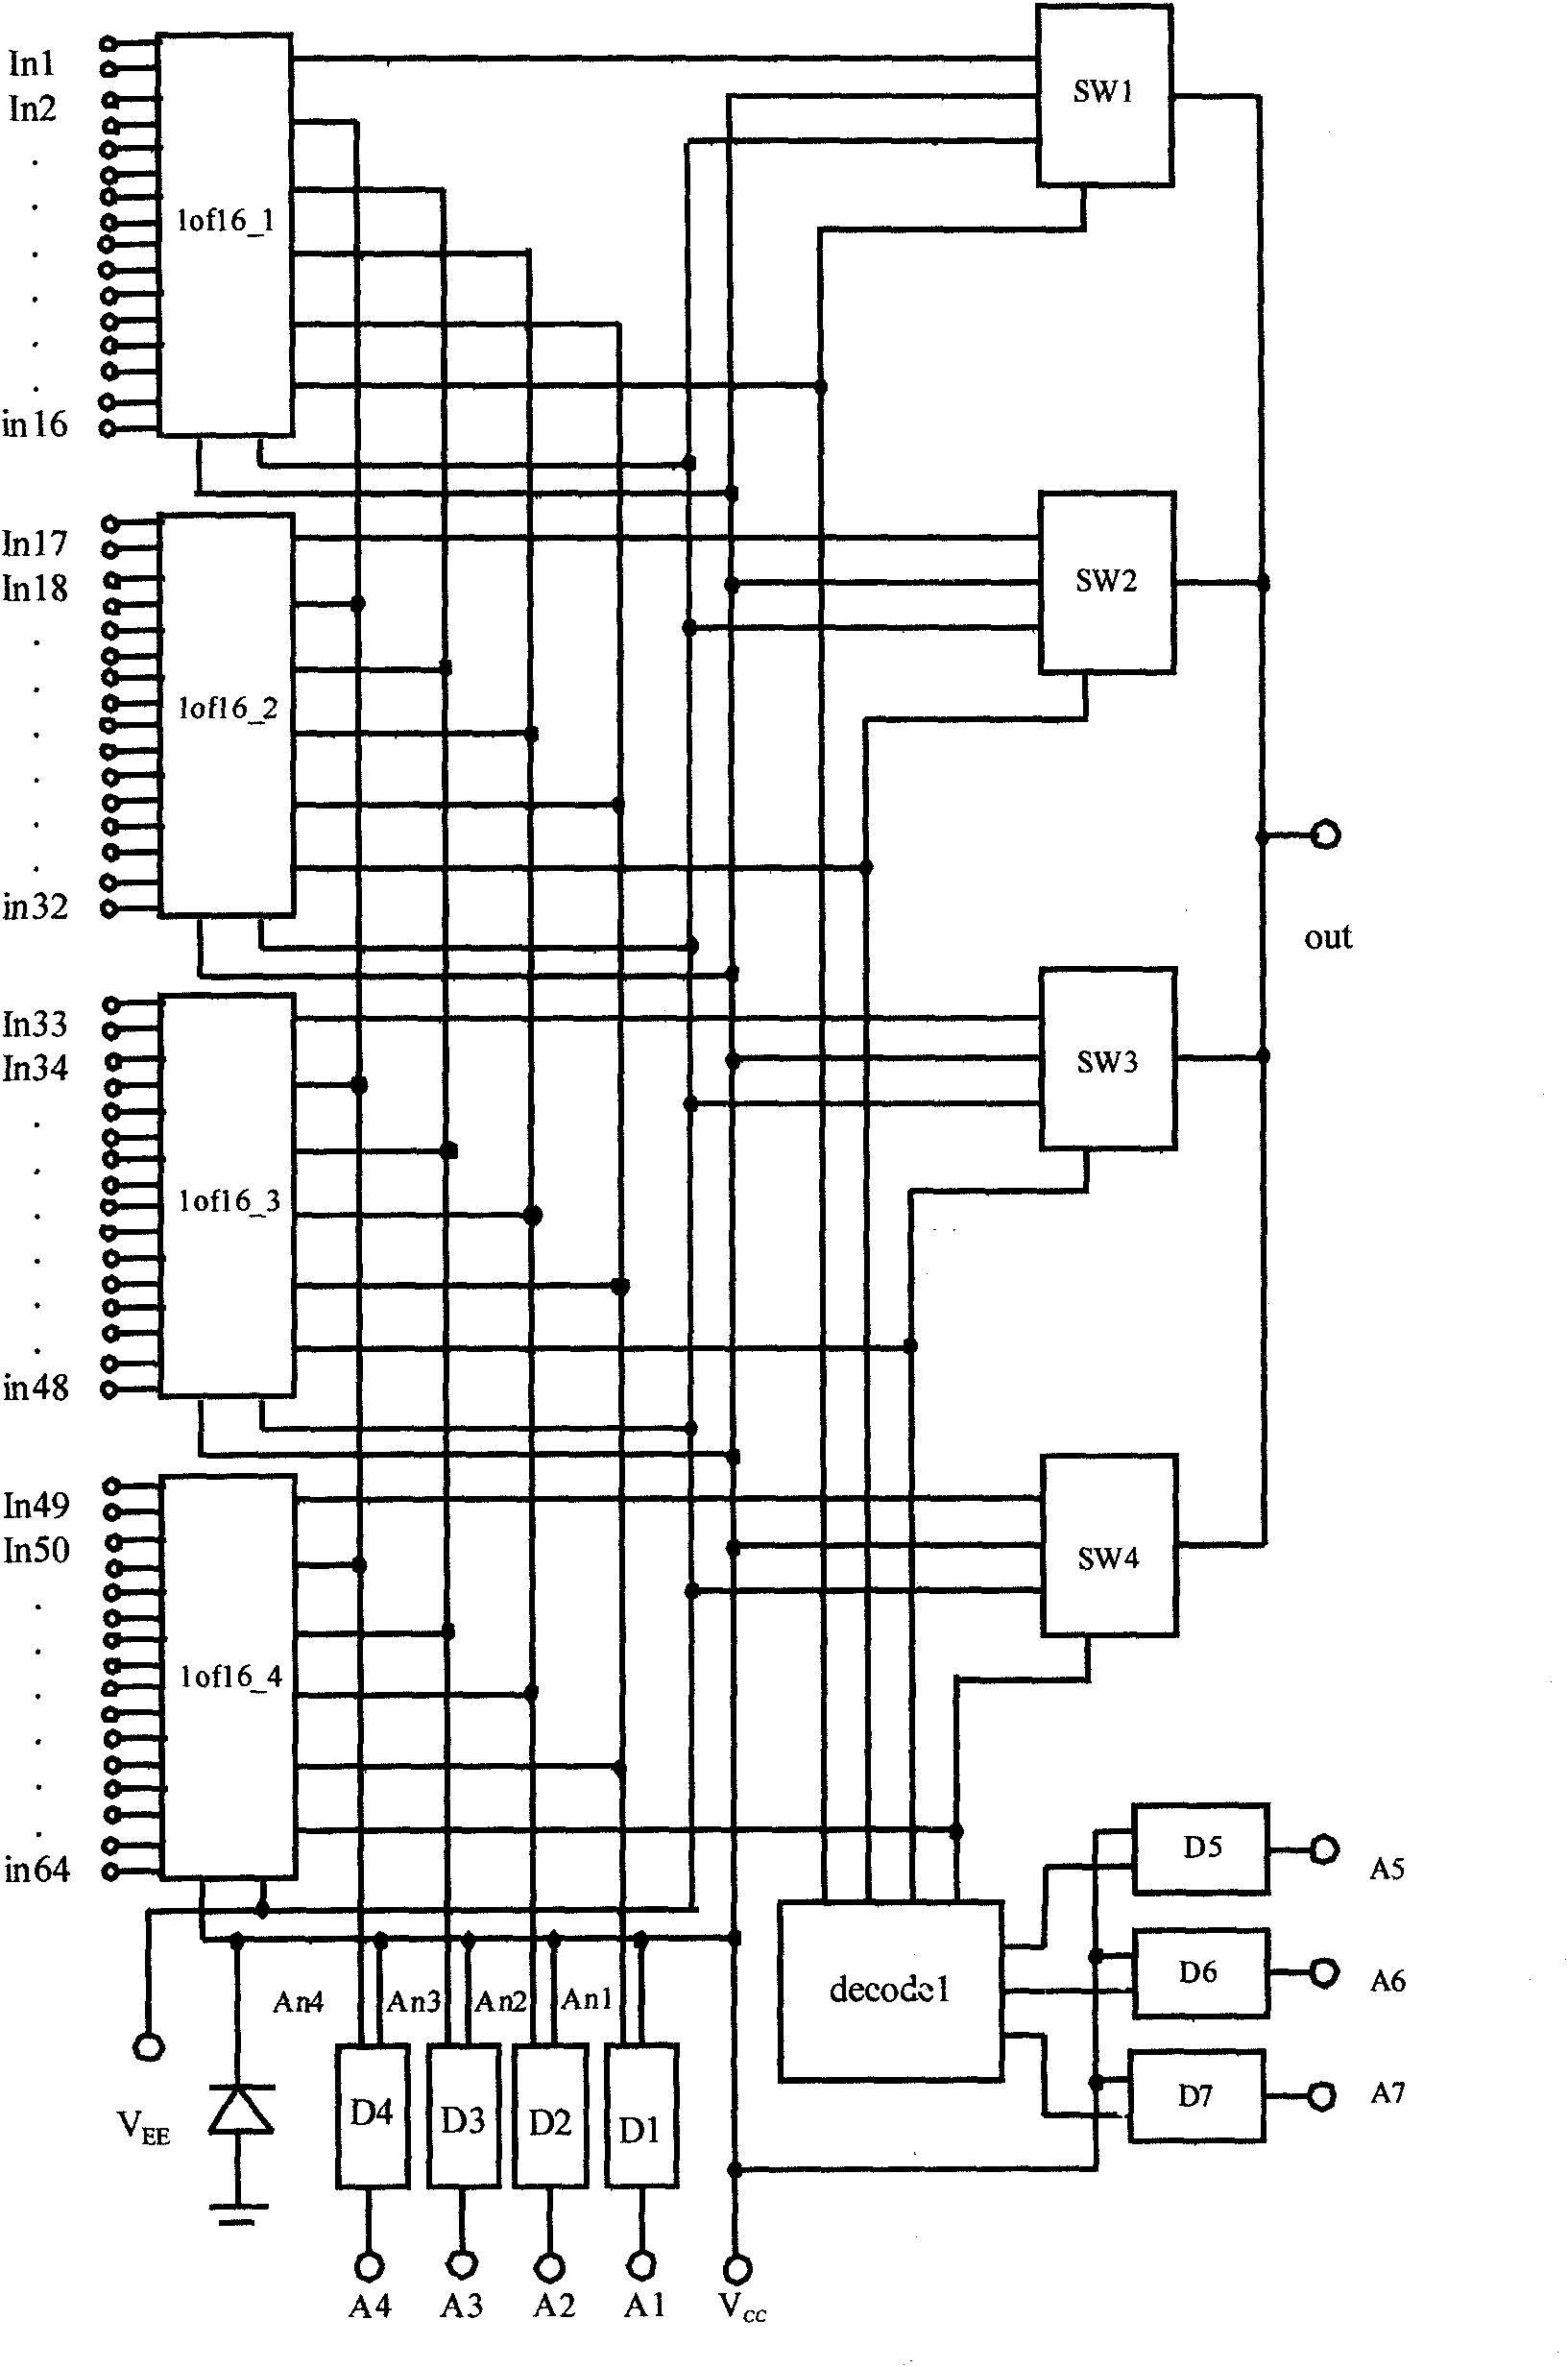 64 to 1 analog switch circuit of t-switch structure